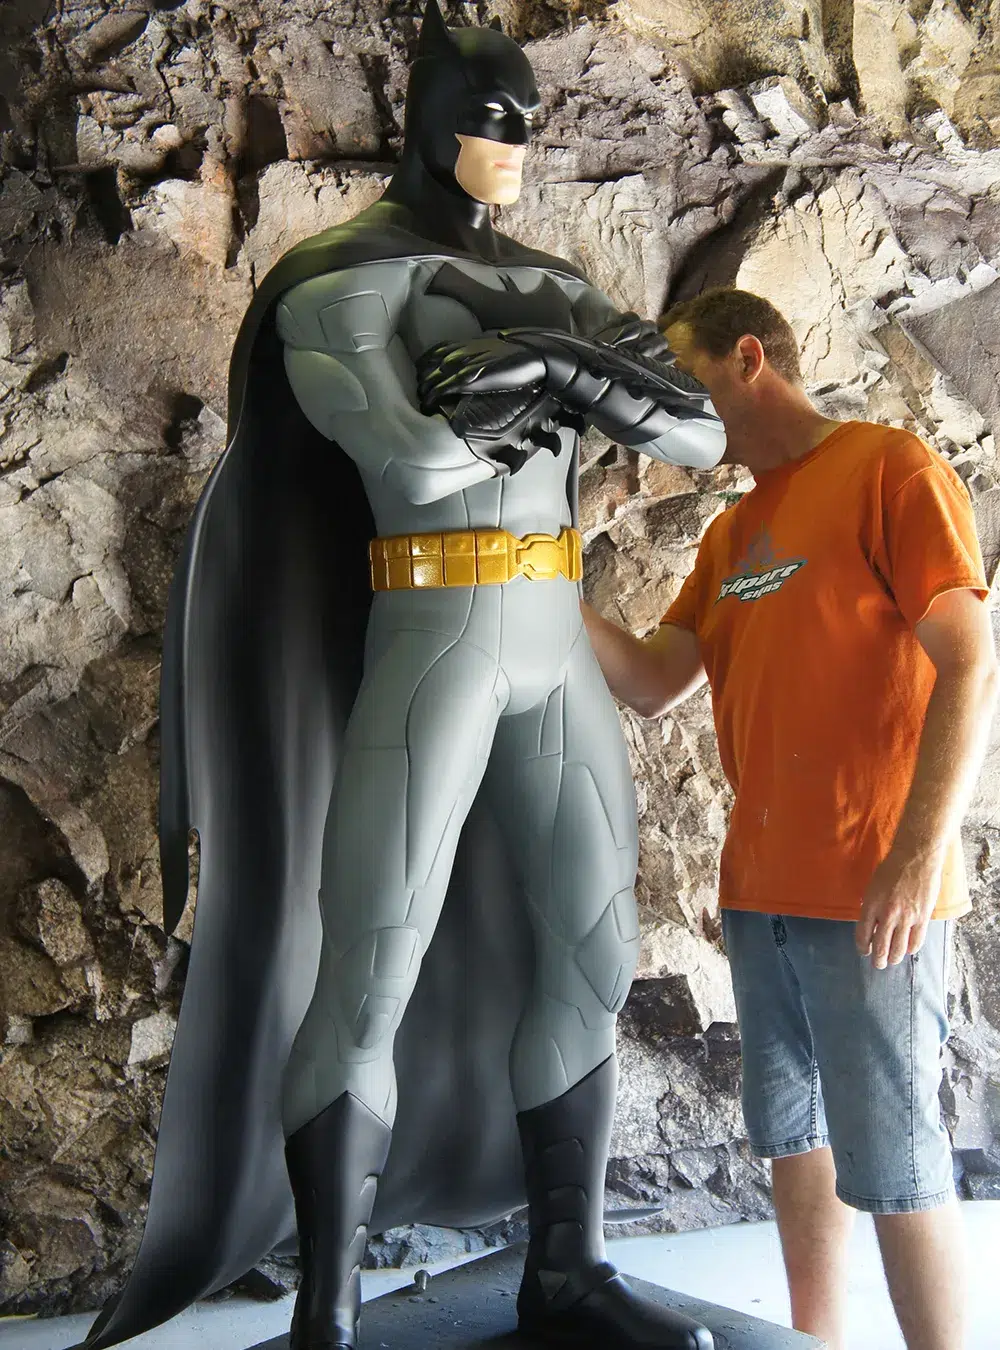 Batman: The Dark Knight stands tall and imposing in this representation. The sculpture captures Batman's stoic demeanor and vigilance, with a well-defined musculature and the iconic bat-symbol on his chest. The detailing on the suit, especially the texture and the folds, make it look realistic.